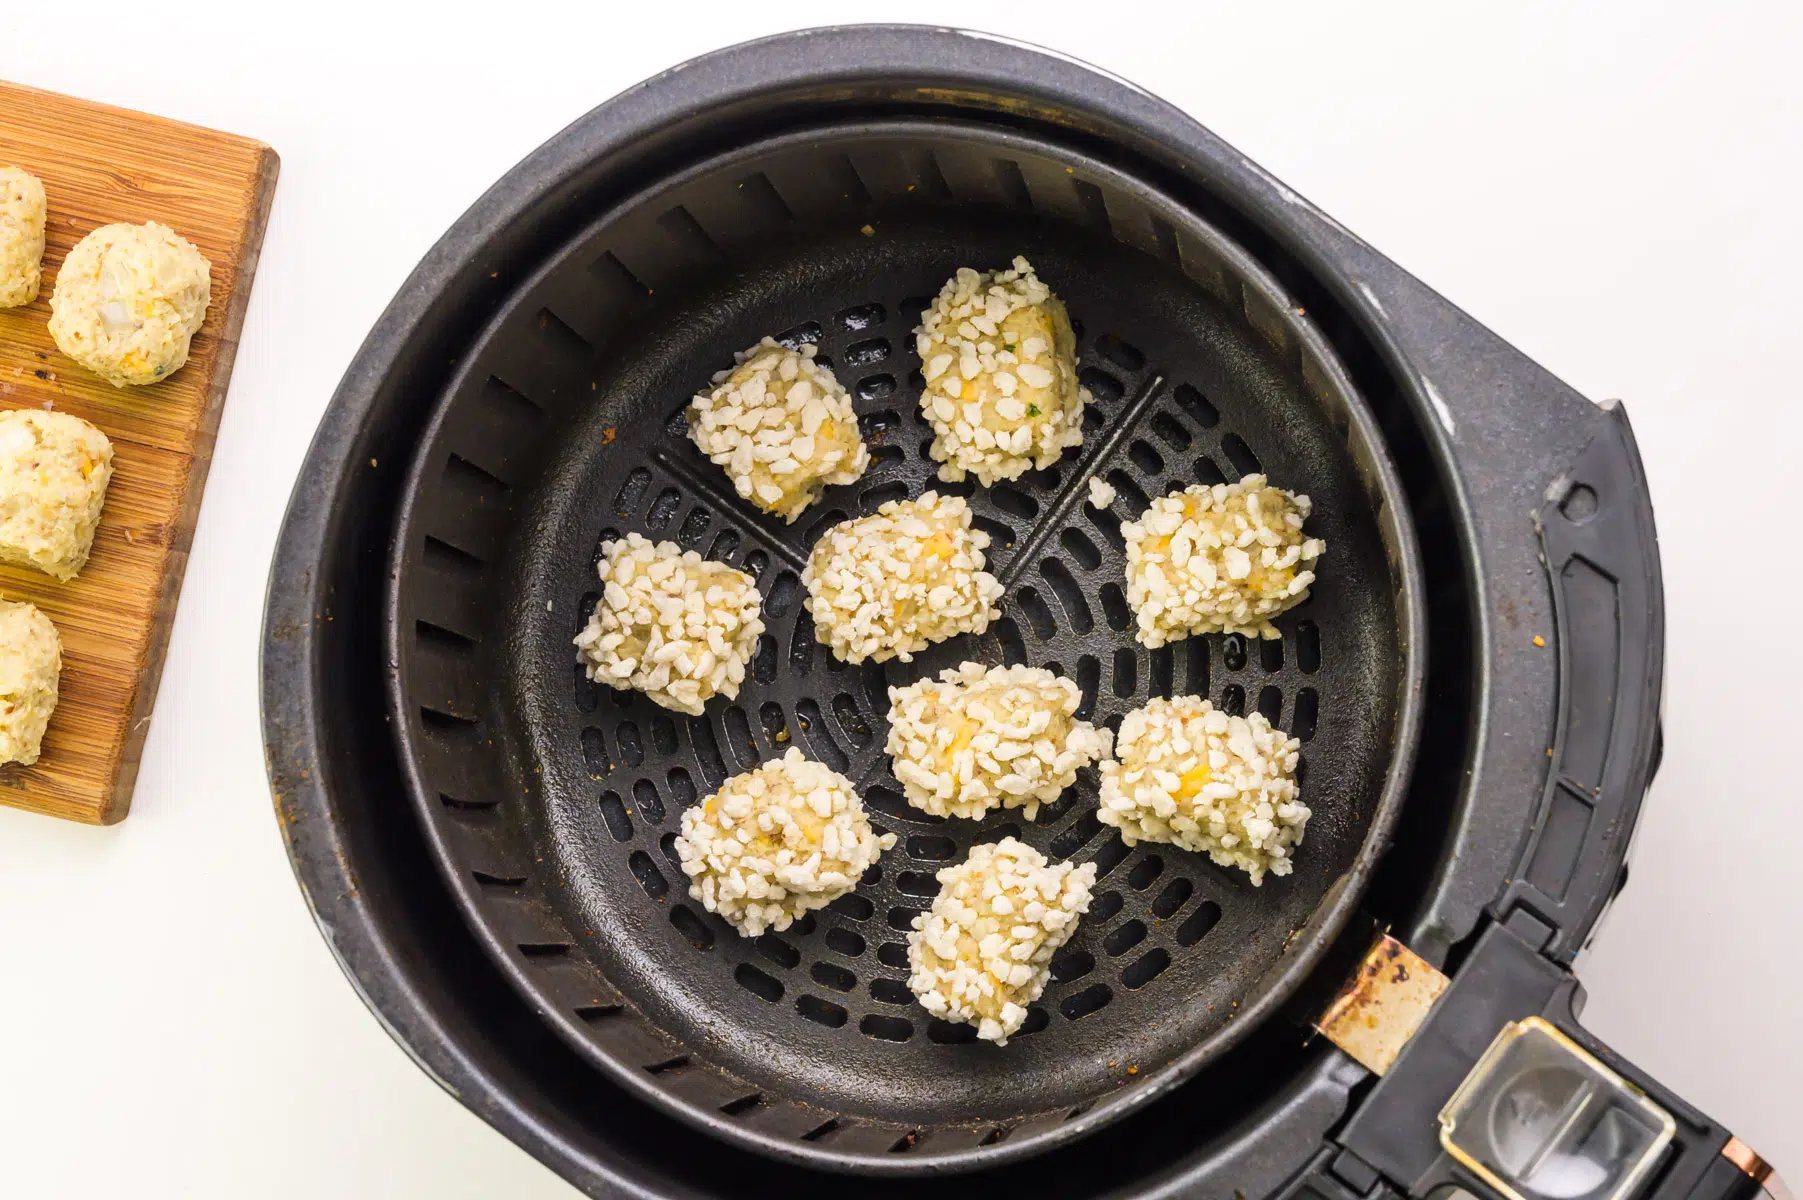 Cauliflower tots are in the bottom of an air fryer basket.